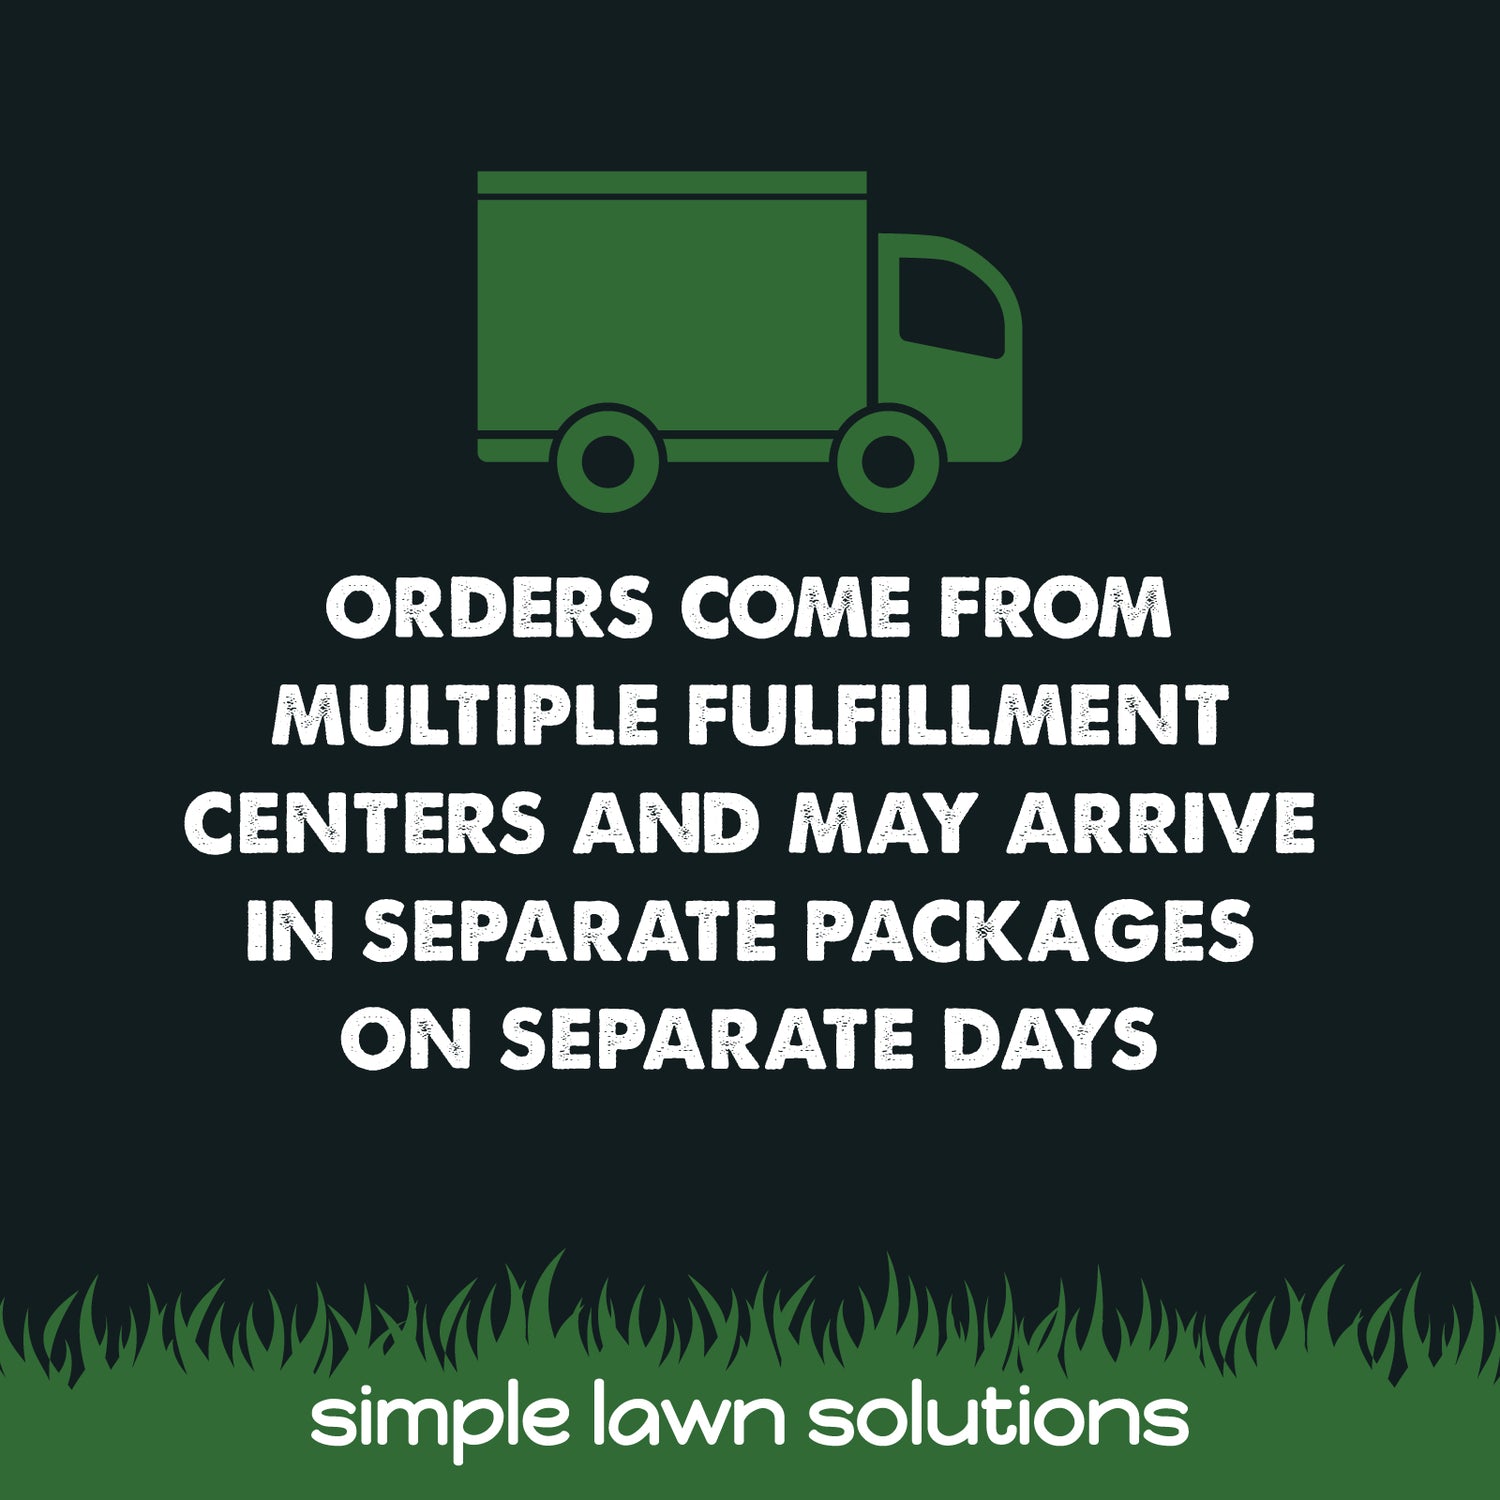 Orders may come from multiple fulfillment centers and may arrive in separate packages on separate days. Simple Lawn Solutions